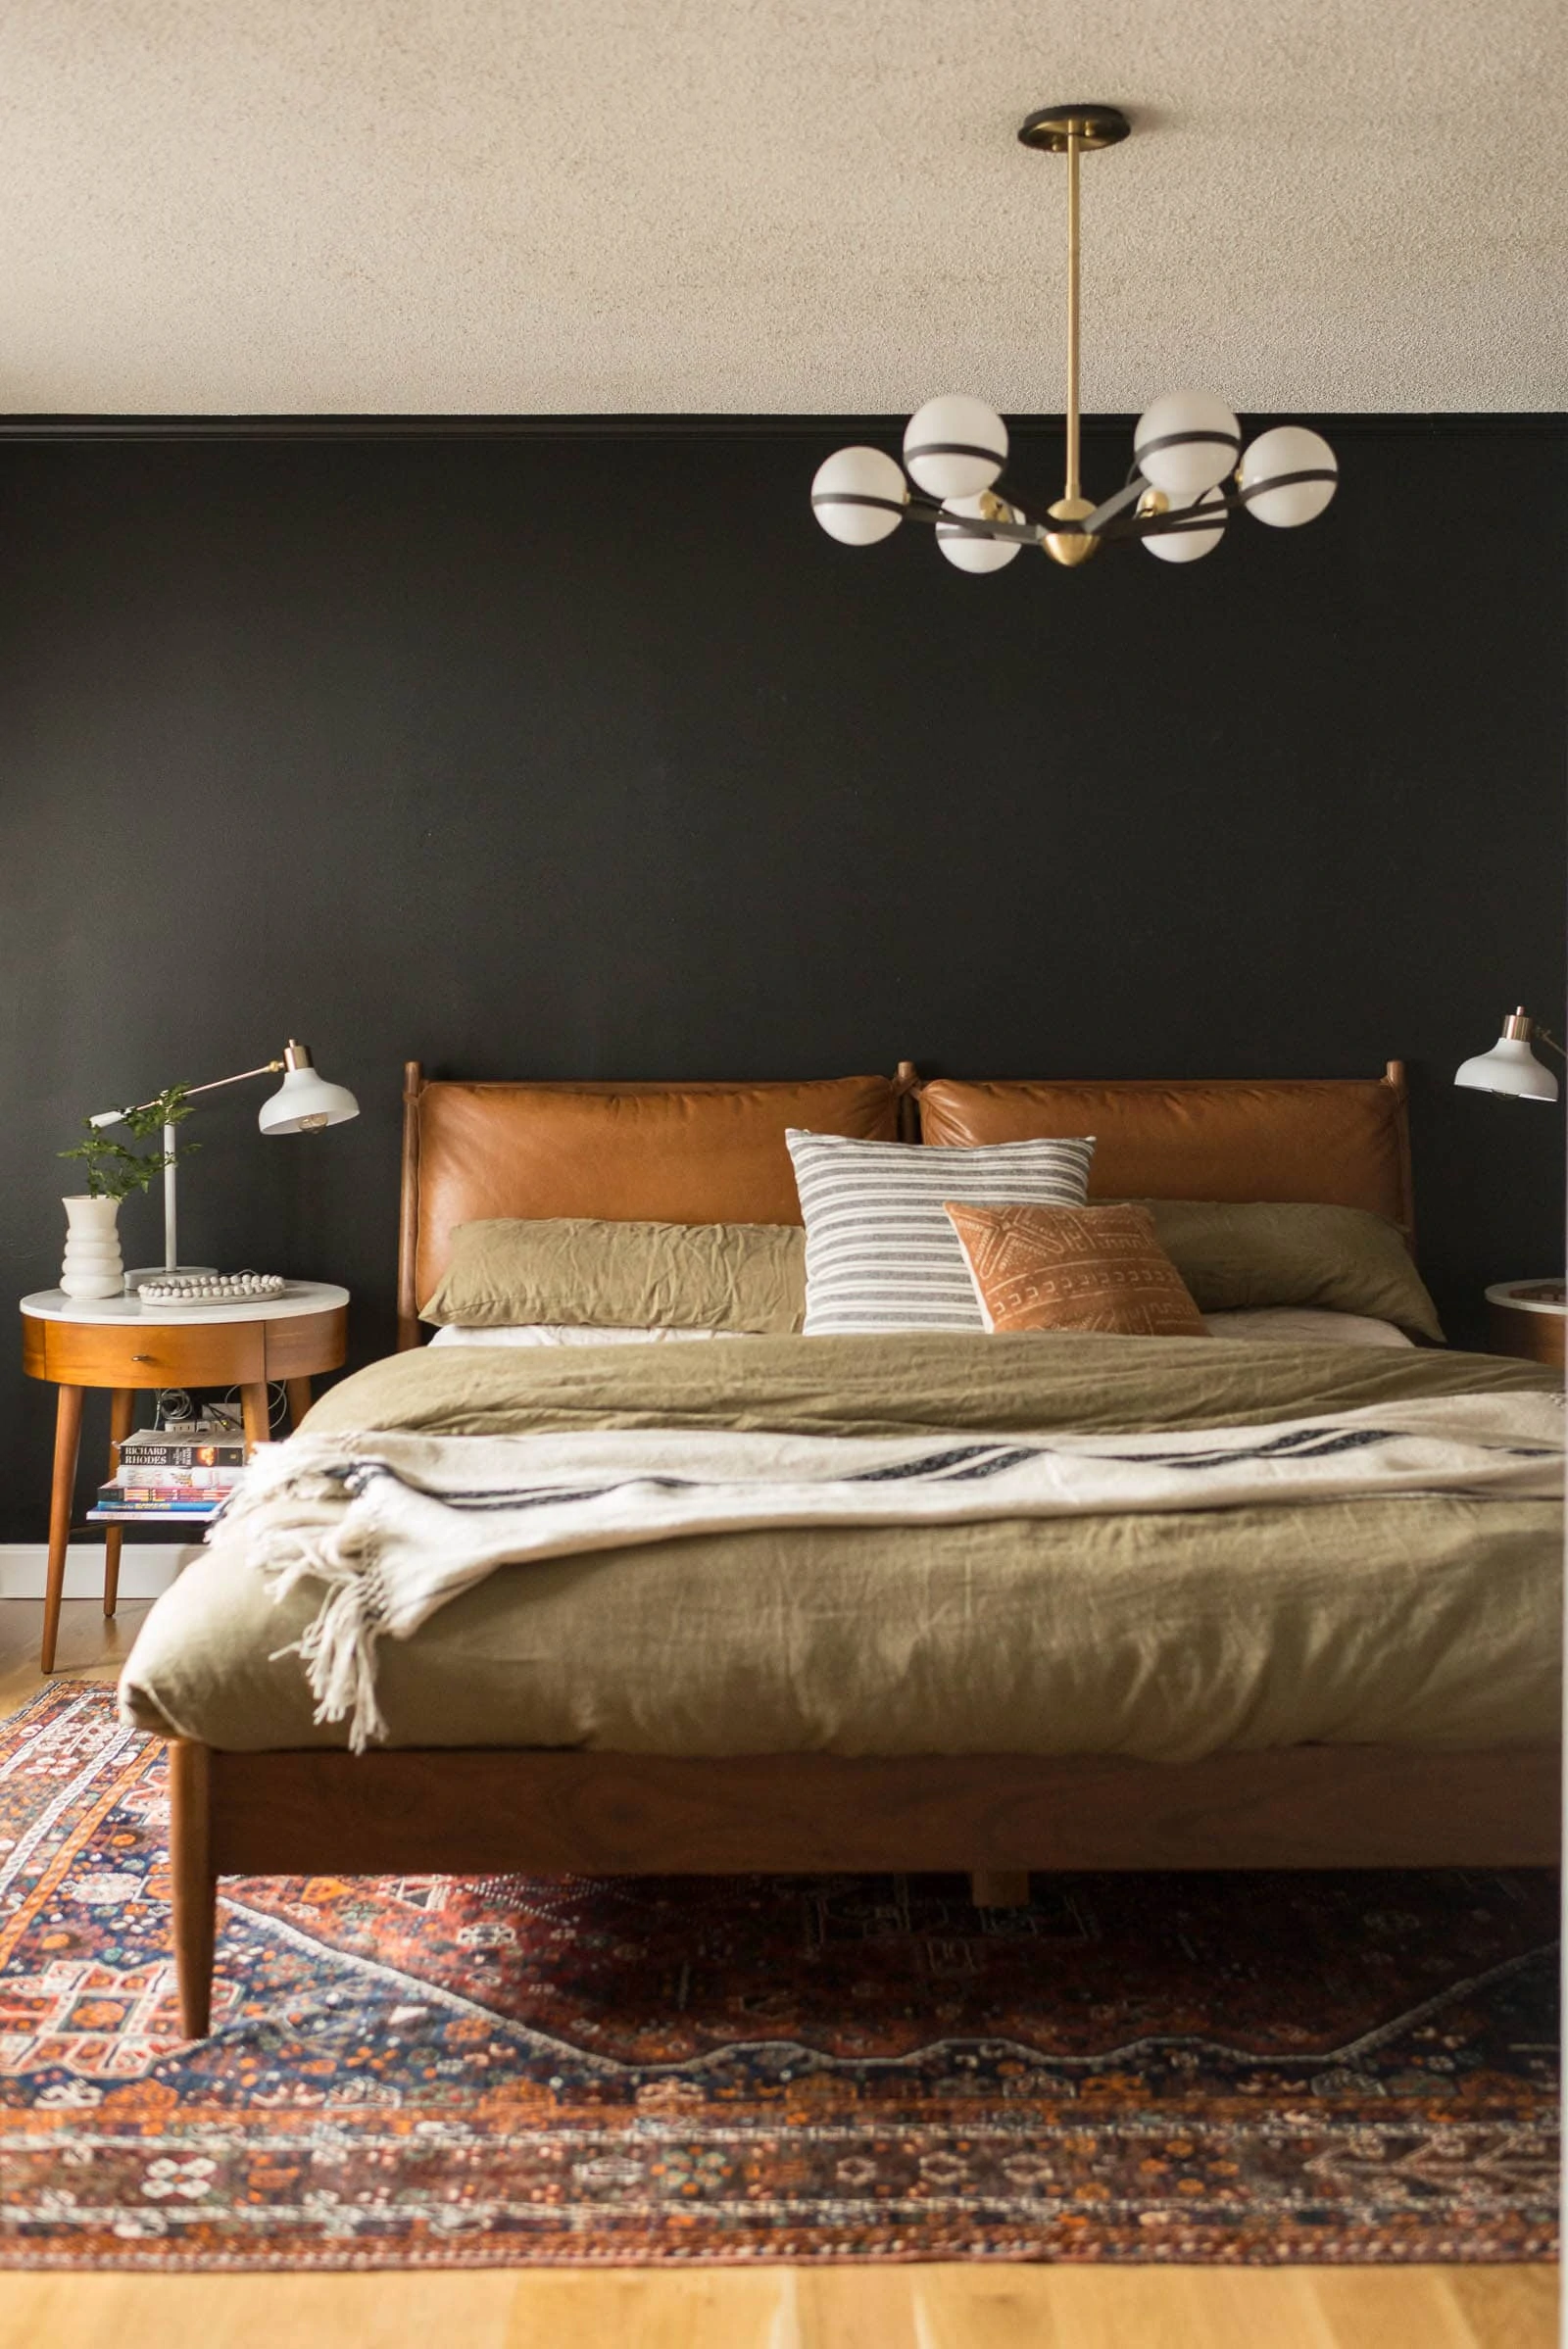 Leather West Elm bed